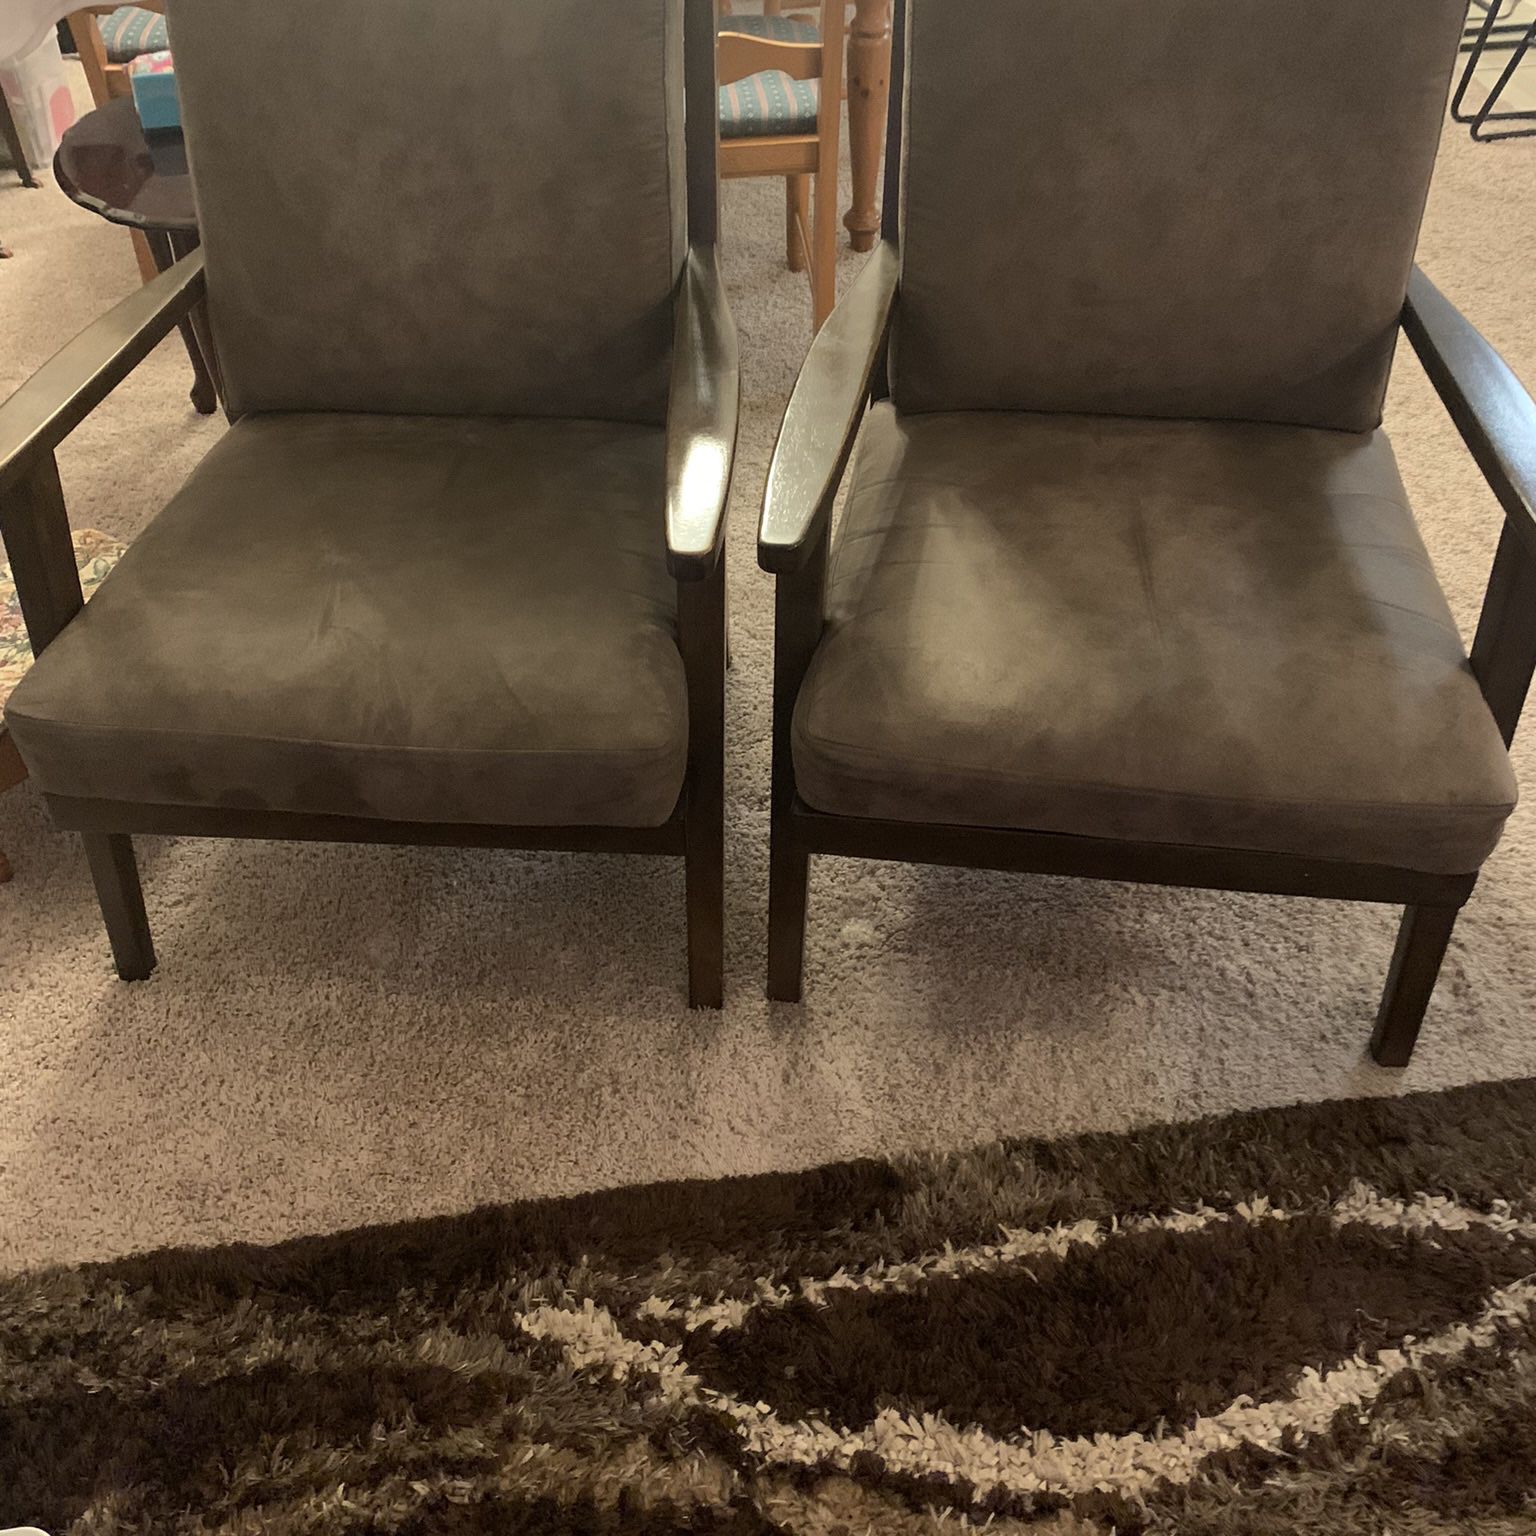 2 Chairs From Ashley